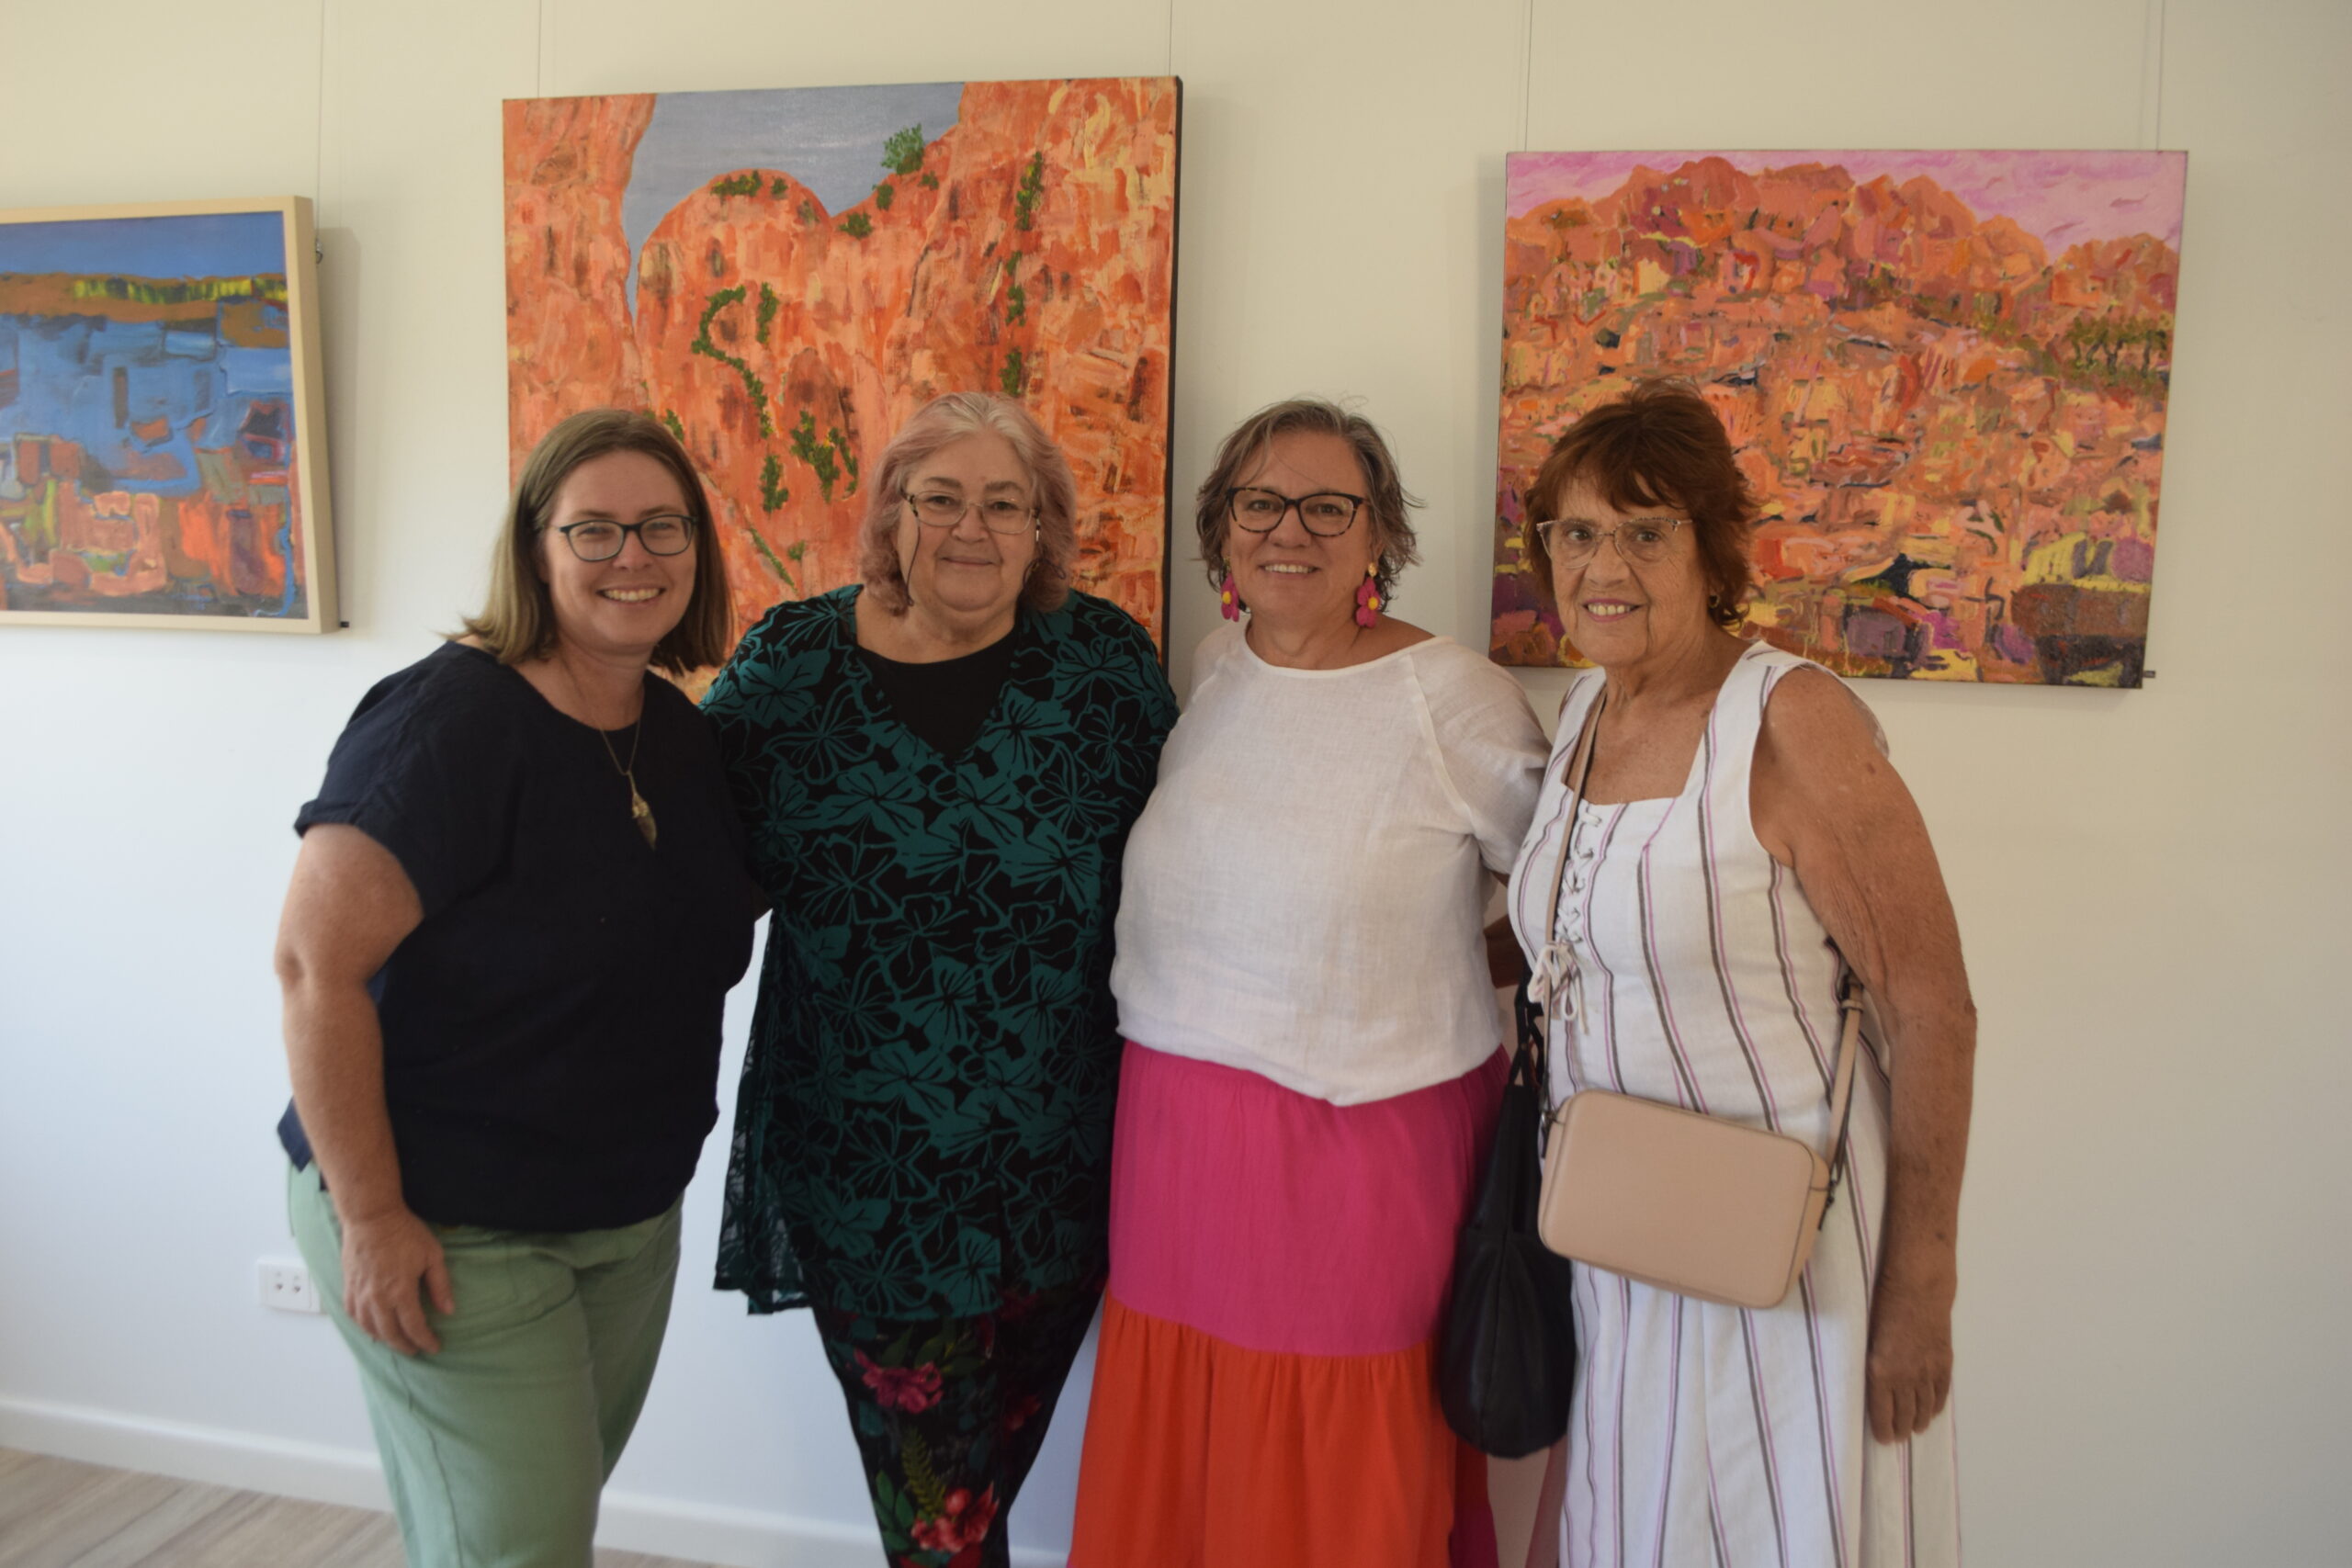 ‘I Dreamed a Dream’ solo exhibition draws a creative crowd to Wee Waa